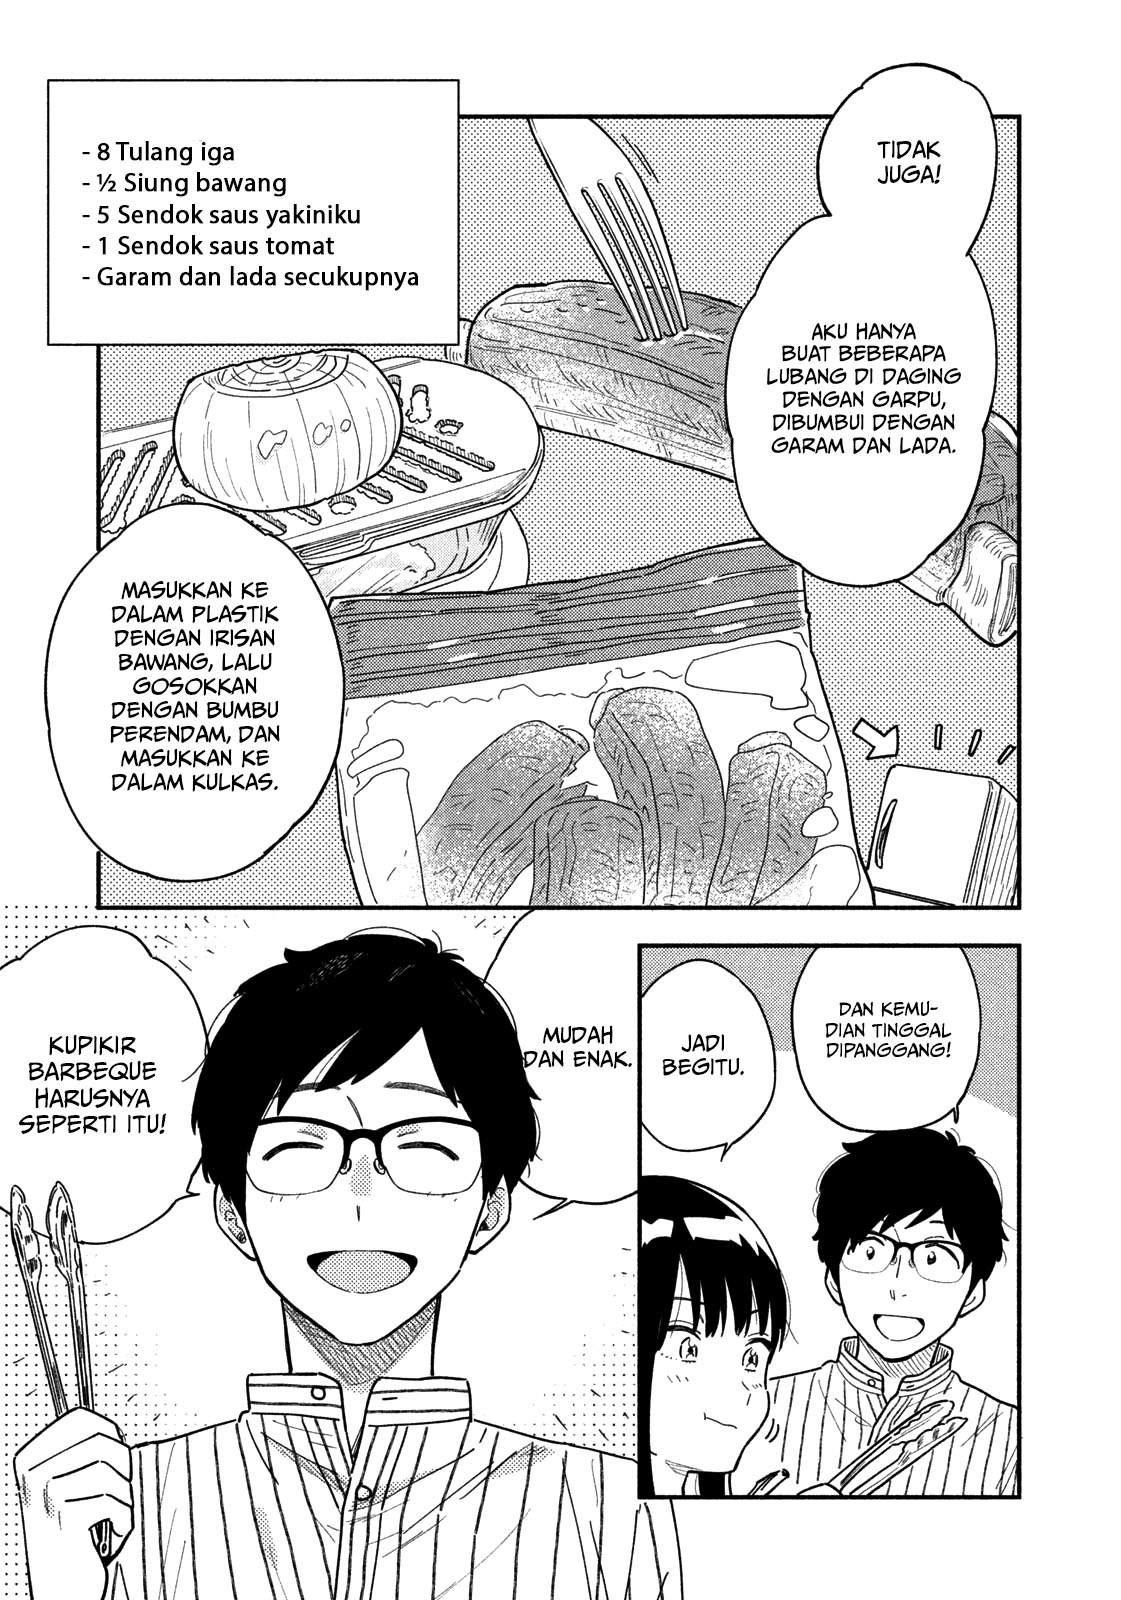 A Rare Marriage: How to Grill Our Love Chapter 1 32